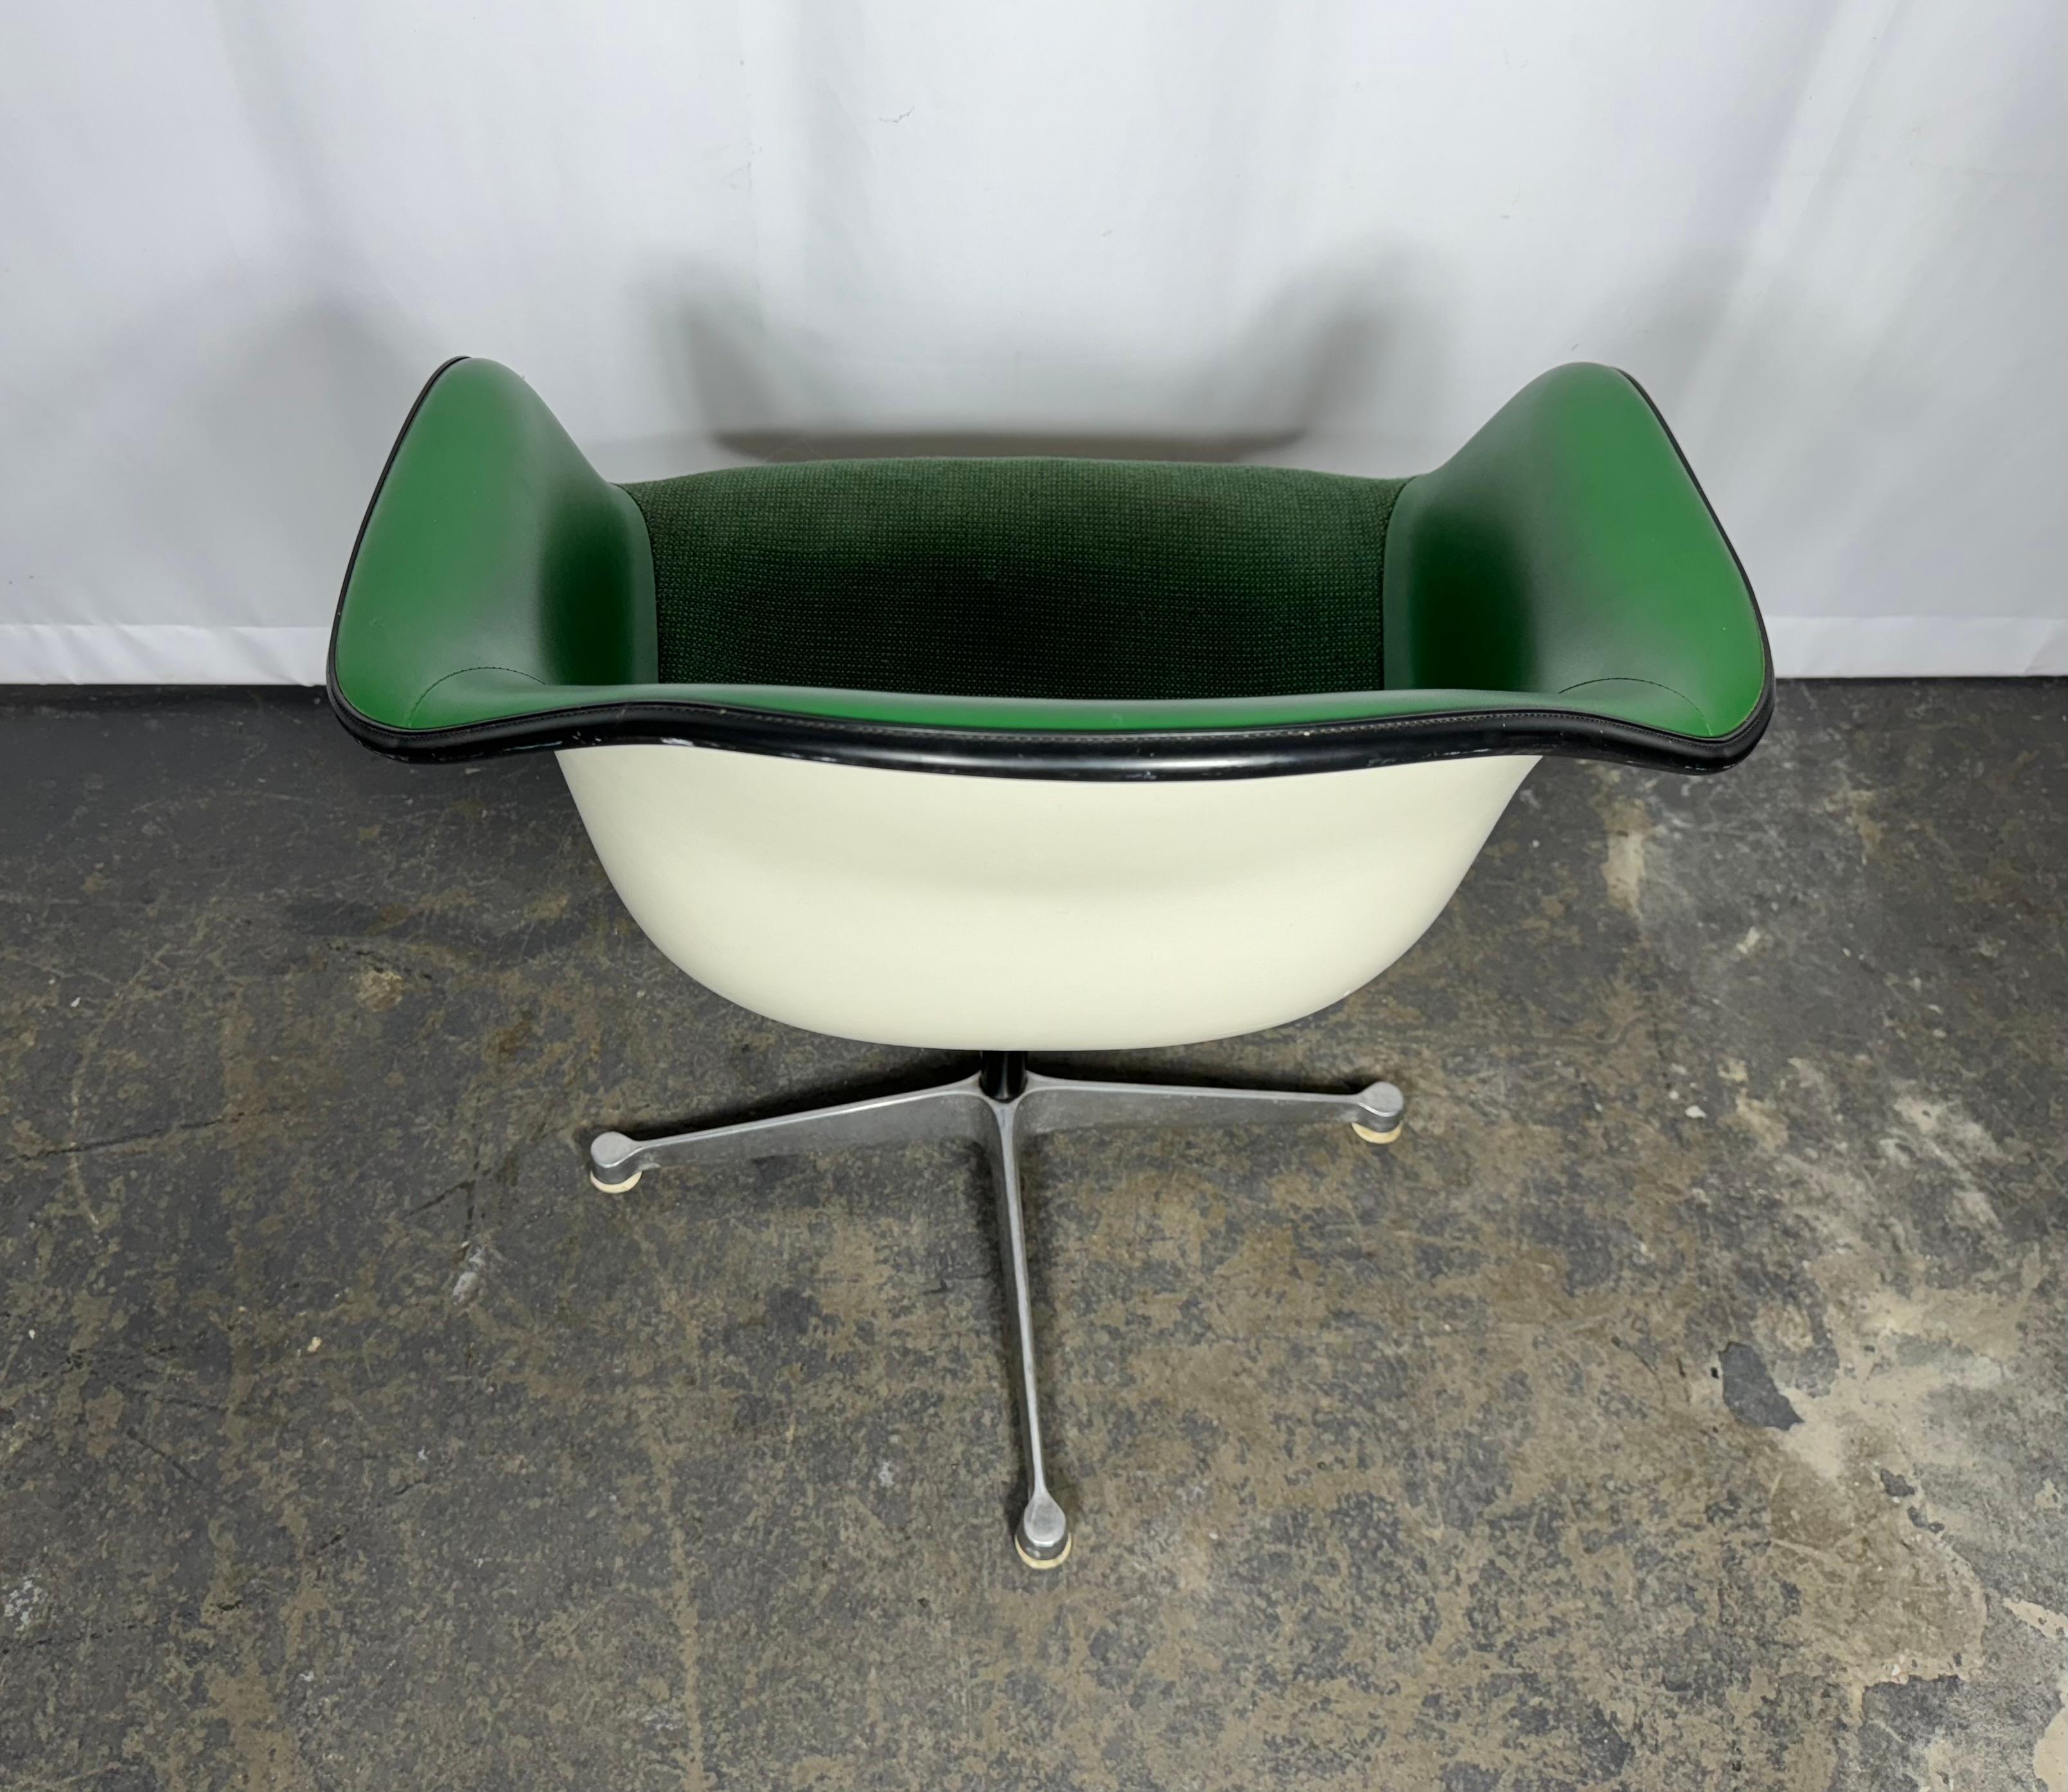 Charles Eames / Herman Miller / Girard  Padded Arm Shell Swivel Aluminum Base In Good Condition For Sale In Buffalo, NY